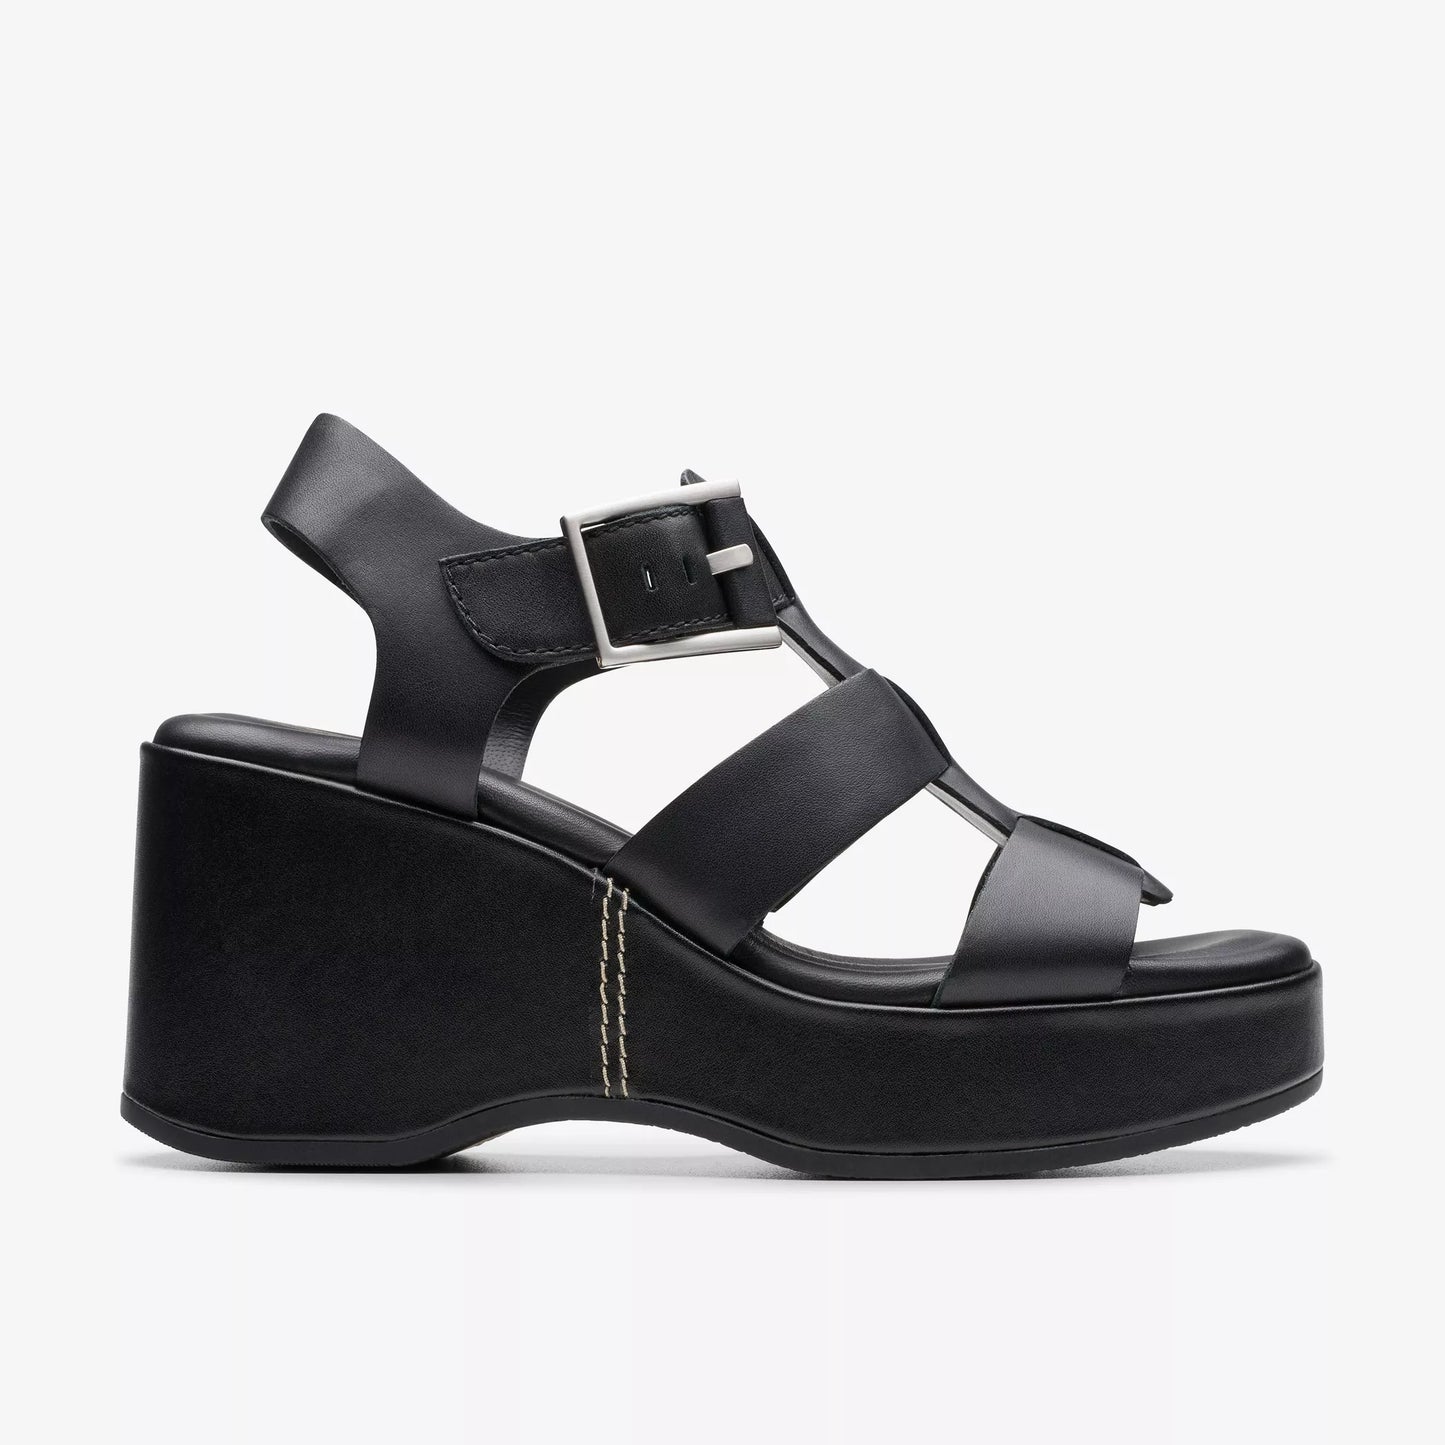 Side view of the  black leather Manon Cove Wedge Sandals by Clarks